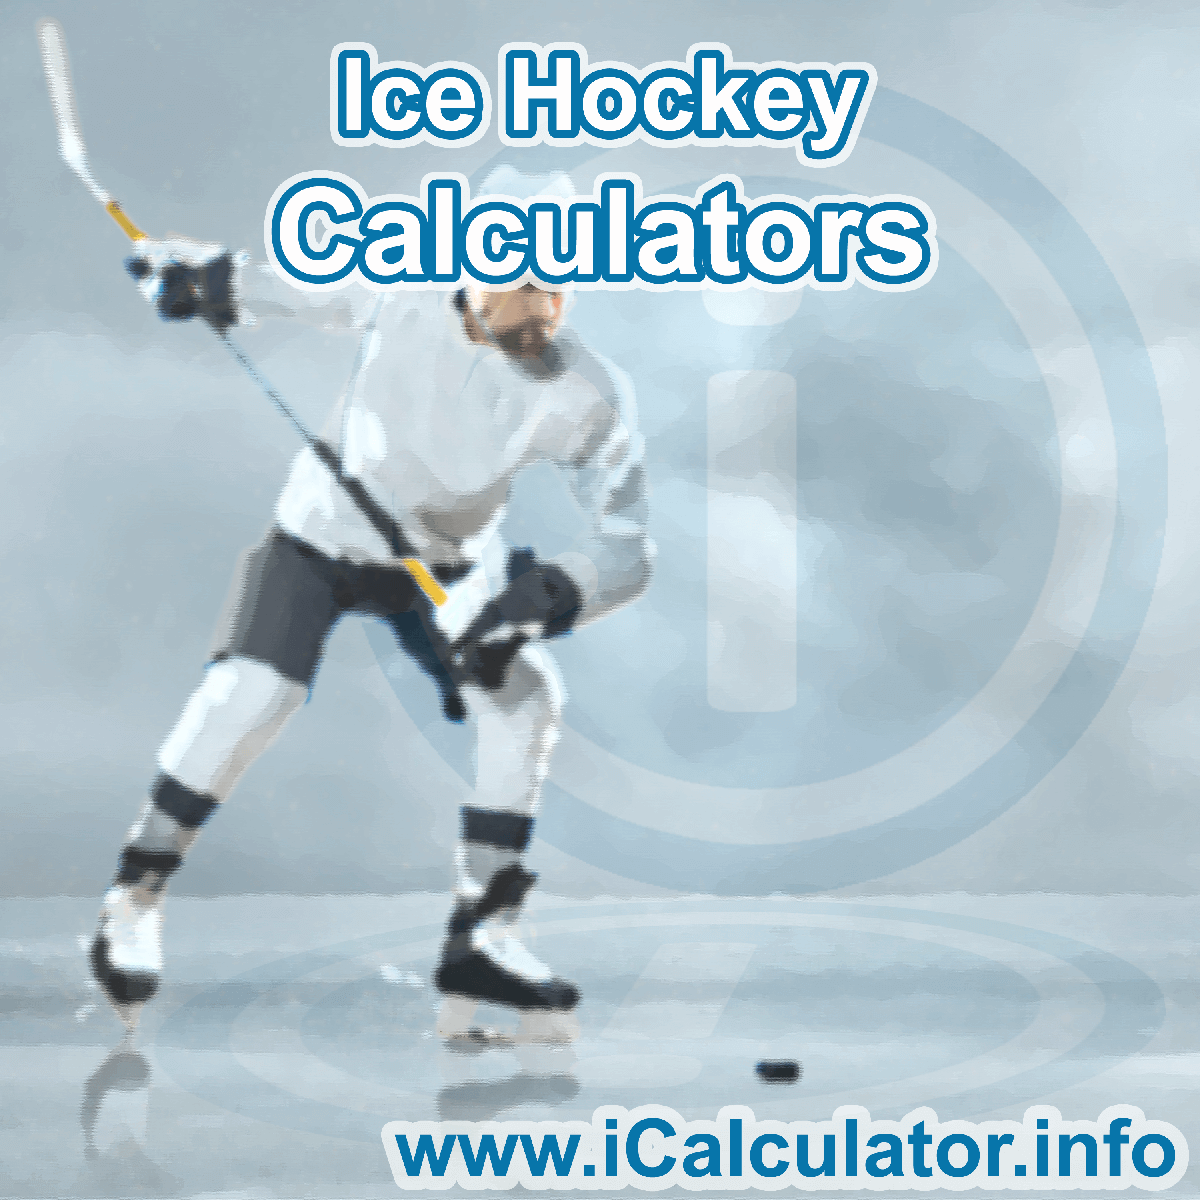 Ice Hockey Calculator. This image shows an Ice Hockey player playing ice hockey - by iCalculator